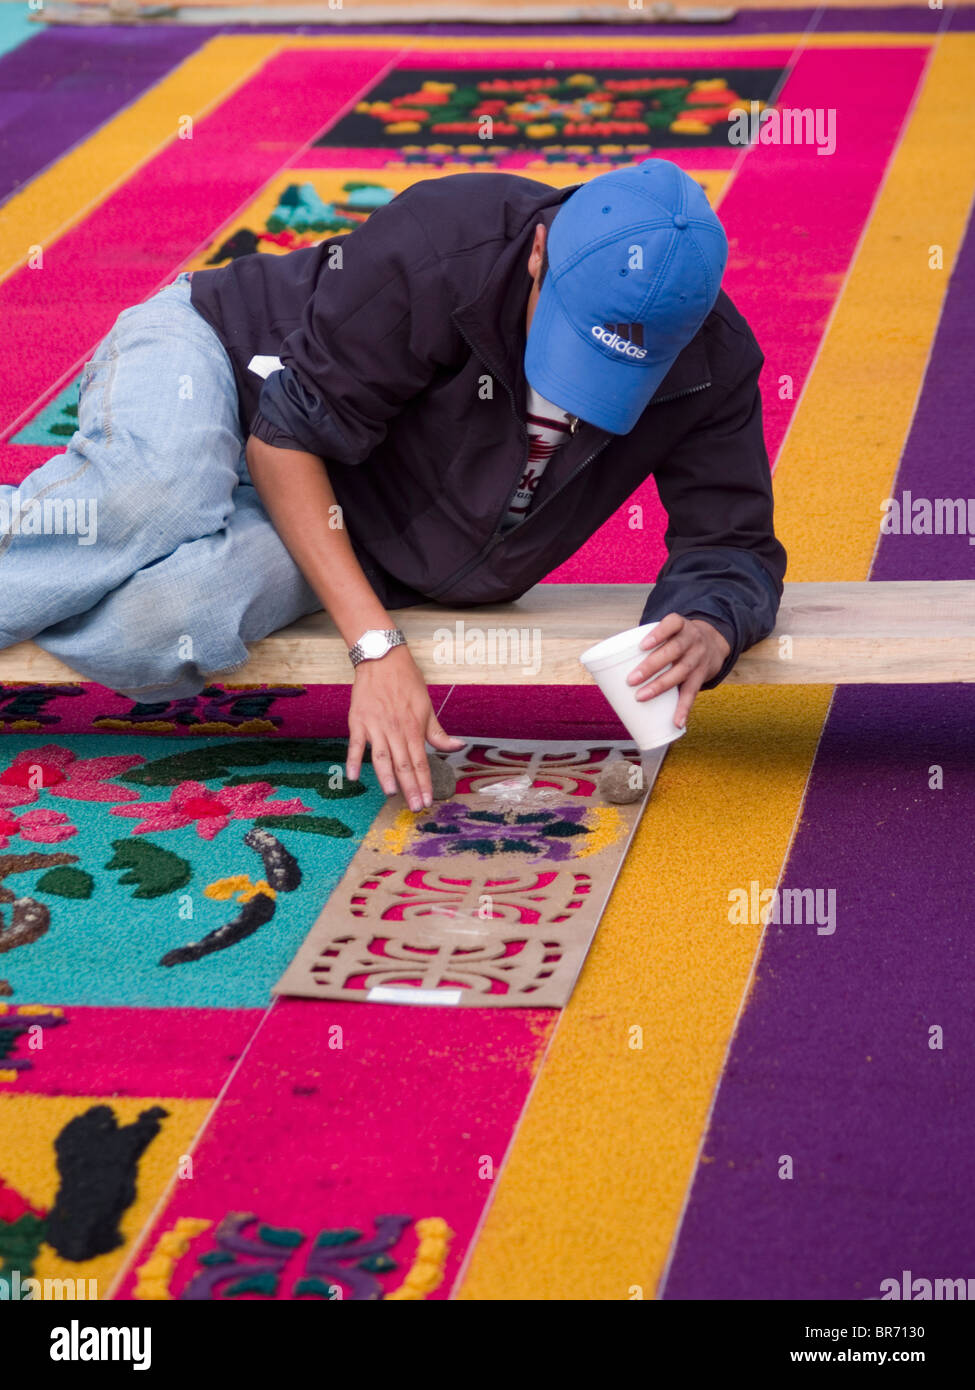 As part of the observance of Lent in Guatemala a person prepares an aromatic carpet for a procession in Antigua Guatemala. Stock Photo